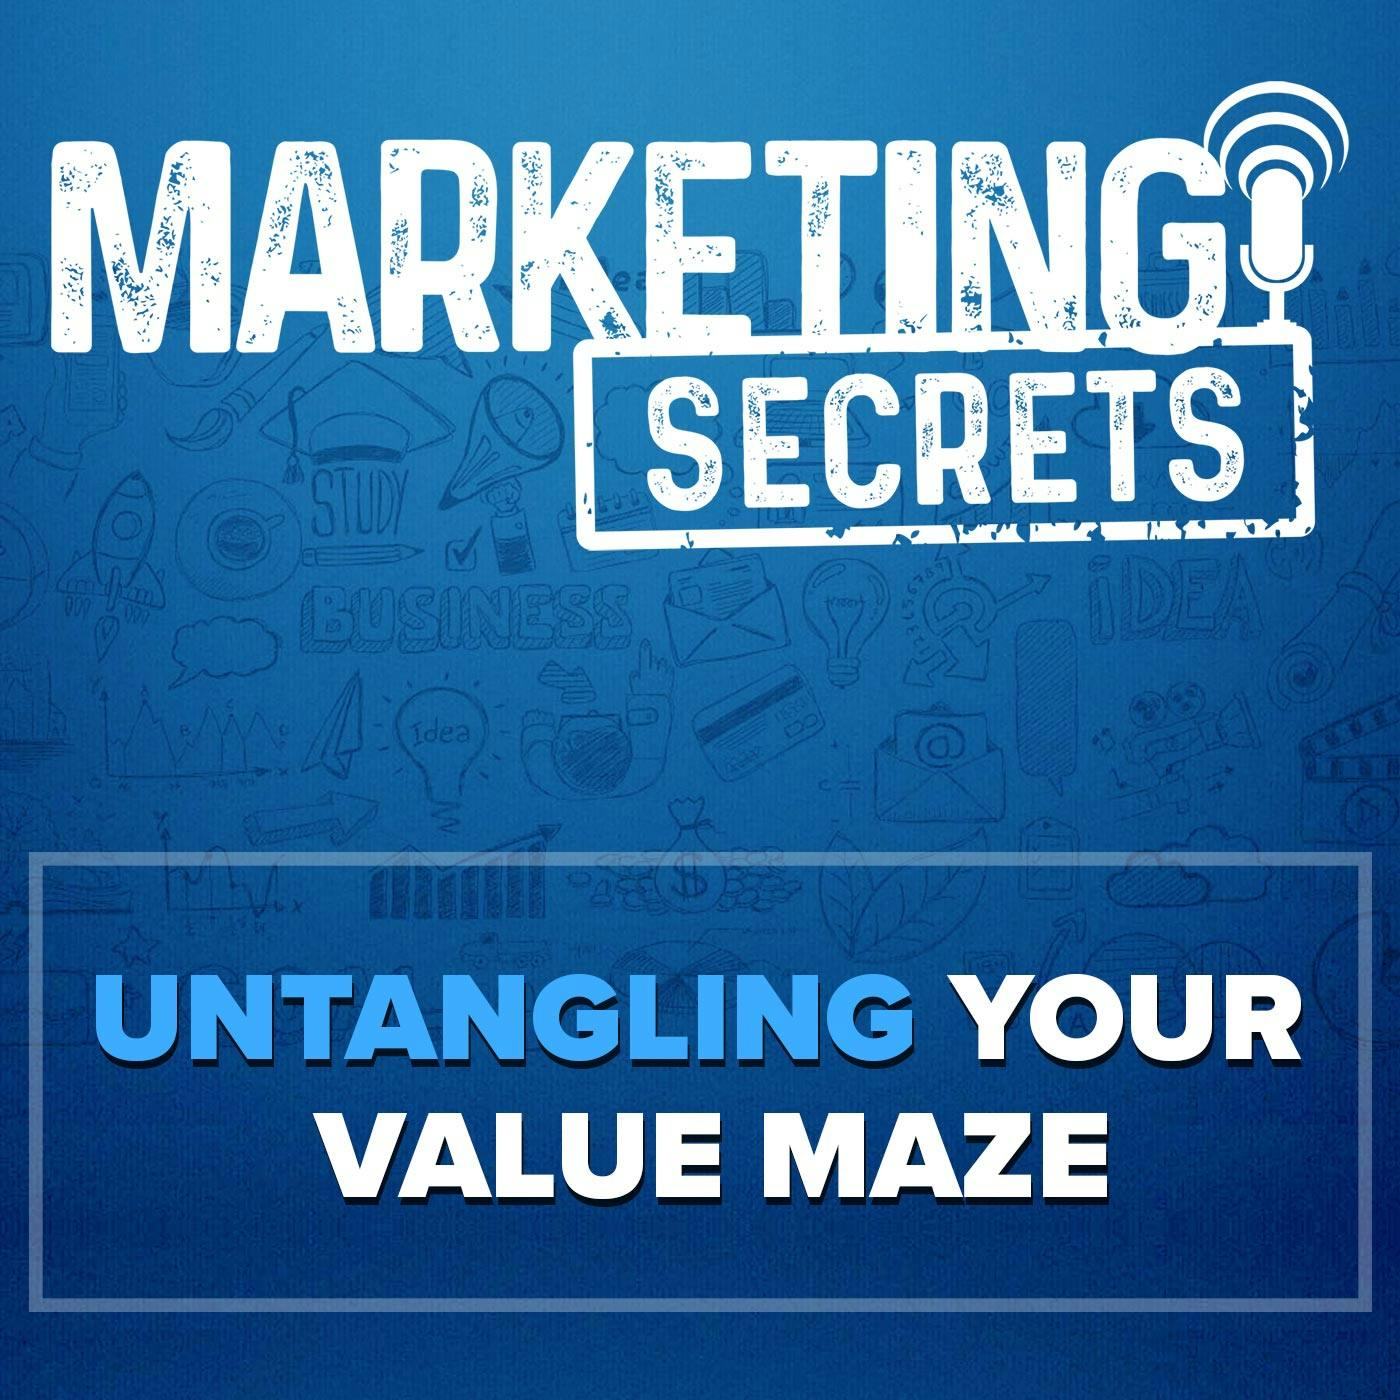 Untangling Your Value Maze